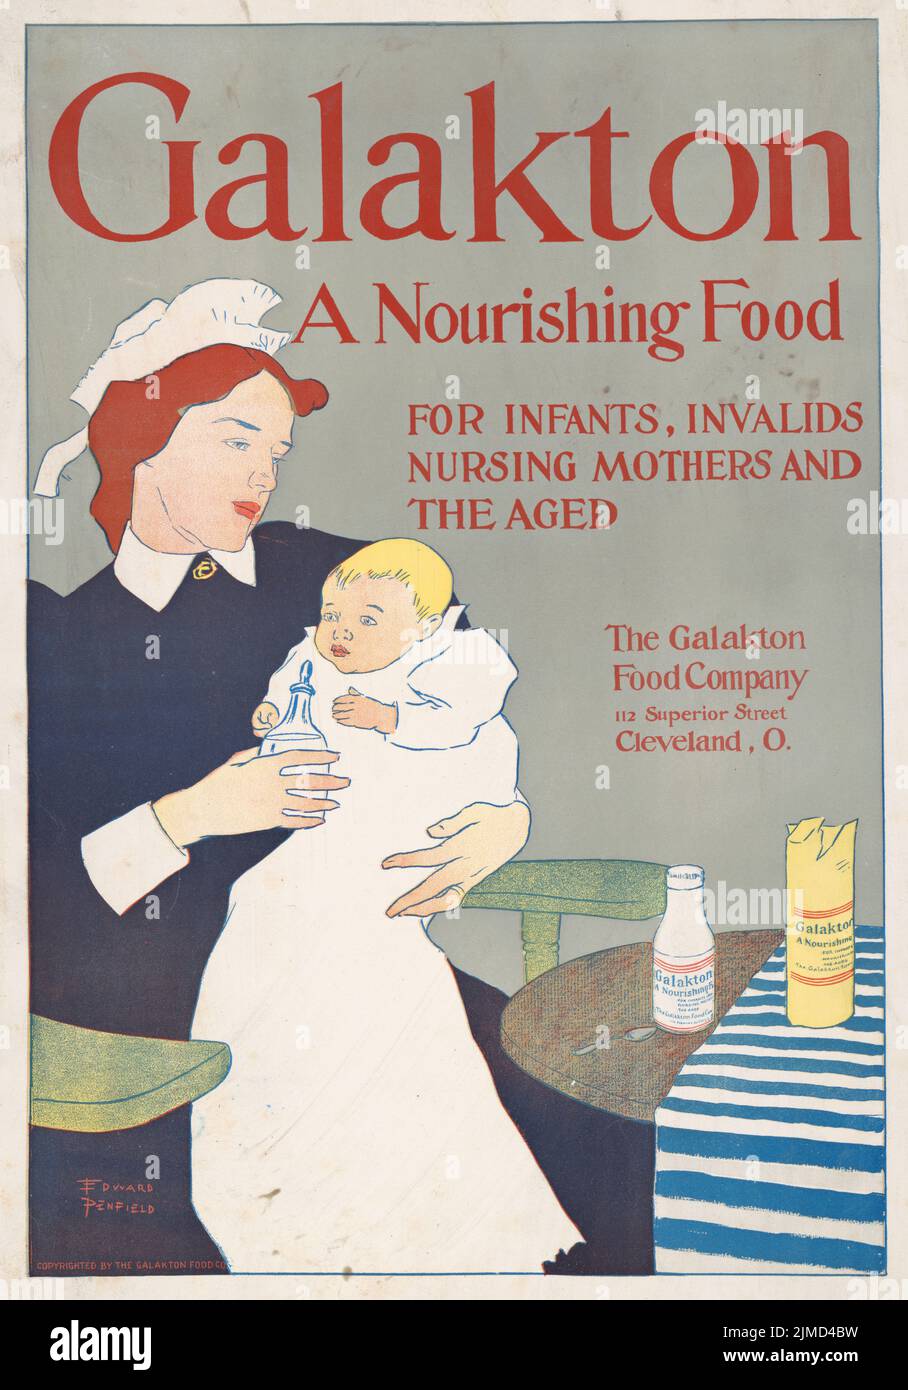 1890 ad for Galakton, a nourishing food for infants, invalids, nursing mothers, & the aged. Illustration by Edward Penfield Stock Photo